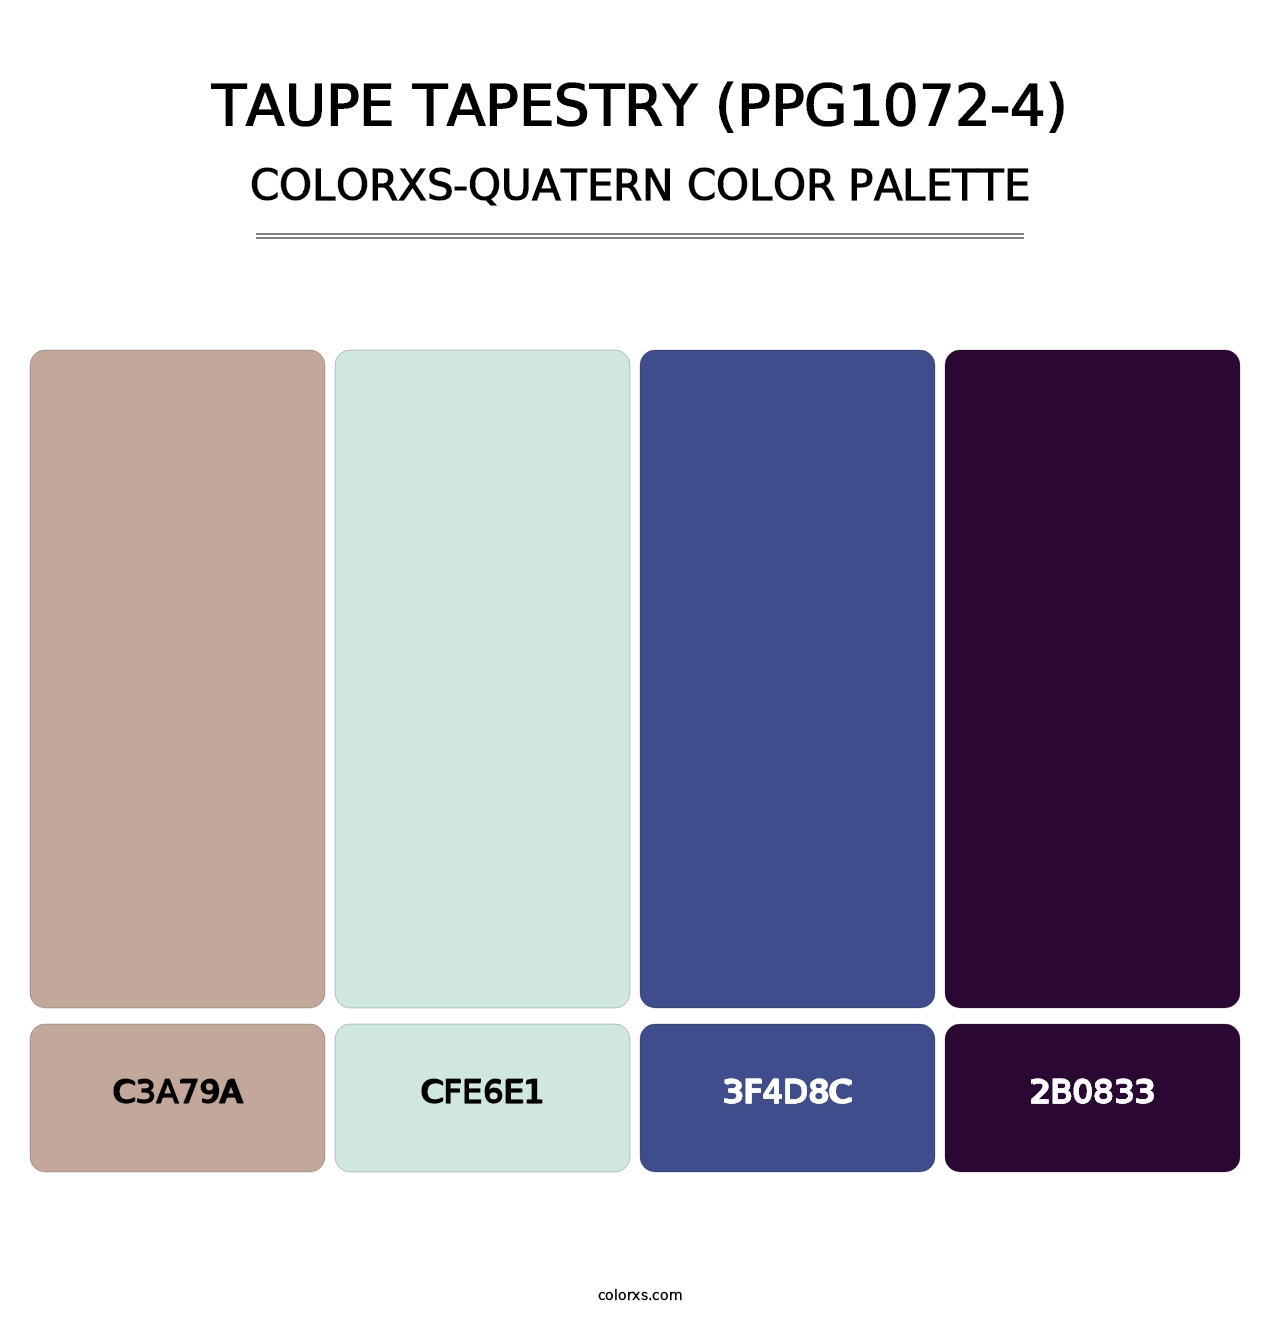 Taupe Tapestry (PPG1072-4) - Colorxs Quatern Palette